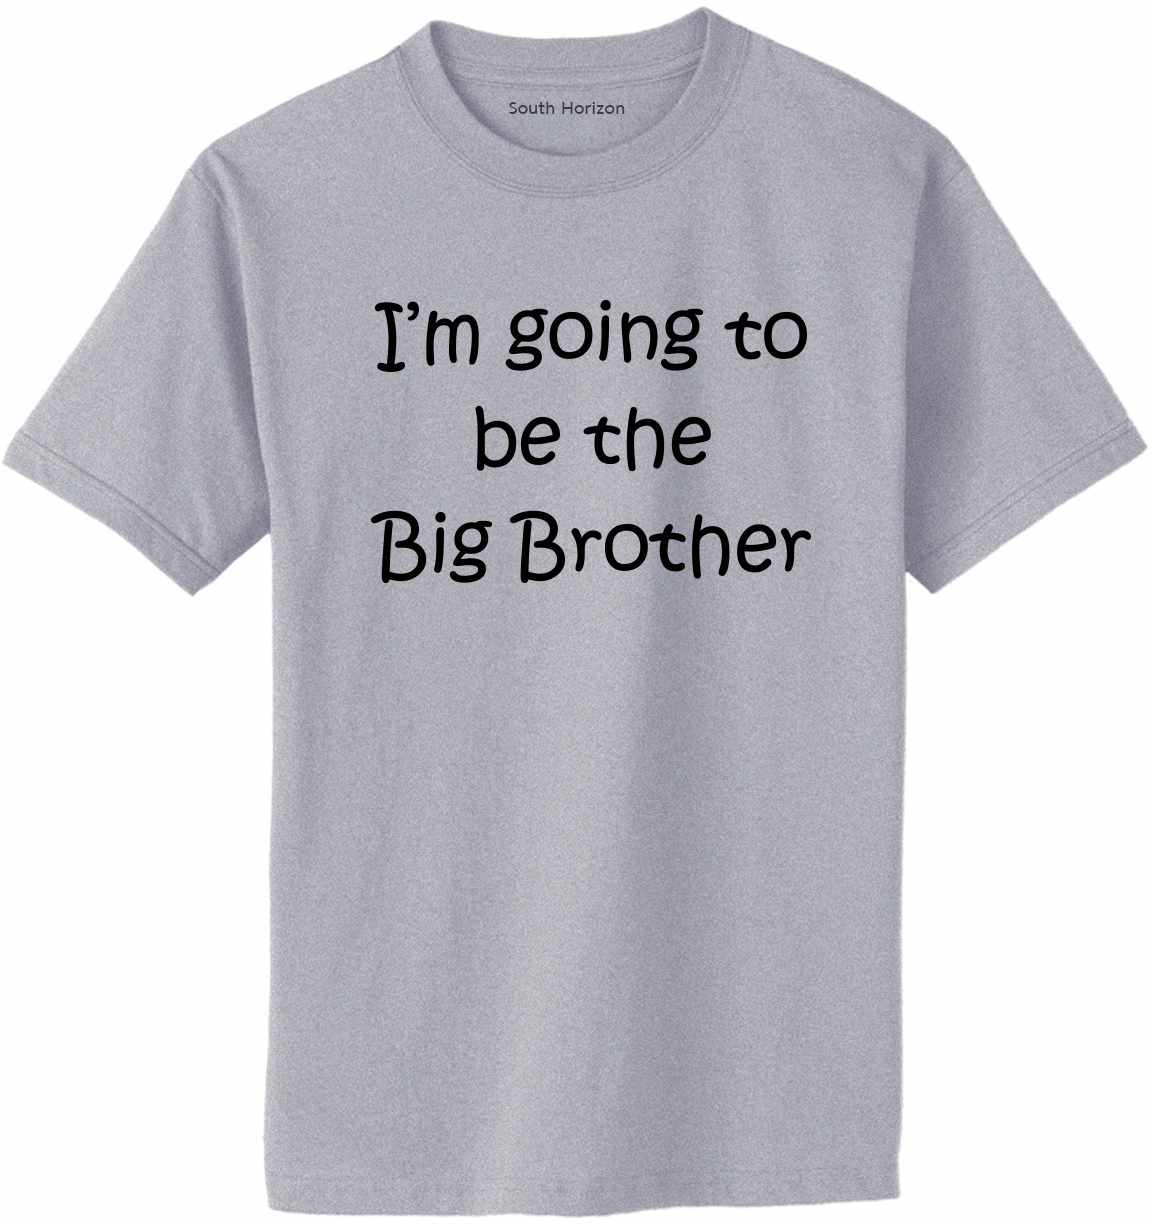 I'M GOING TO BE THE BIG BROTHER Adult T-Shirt (#518-1)